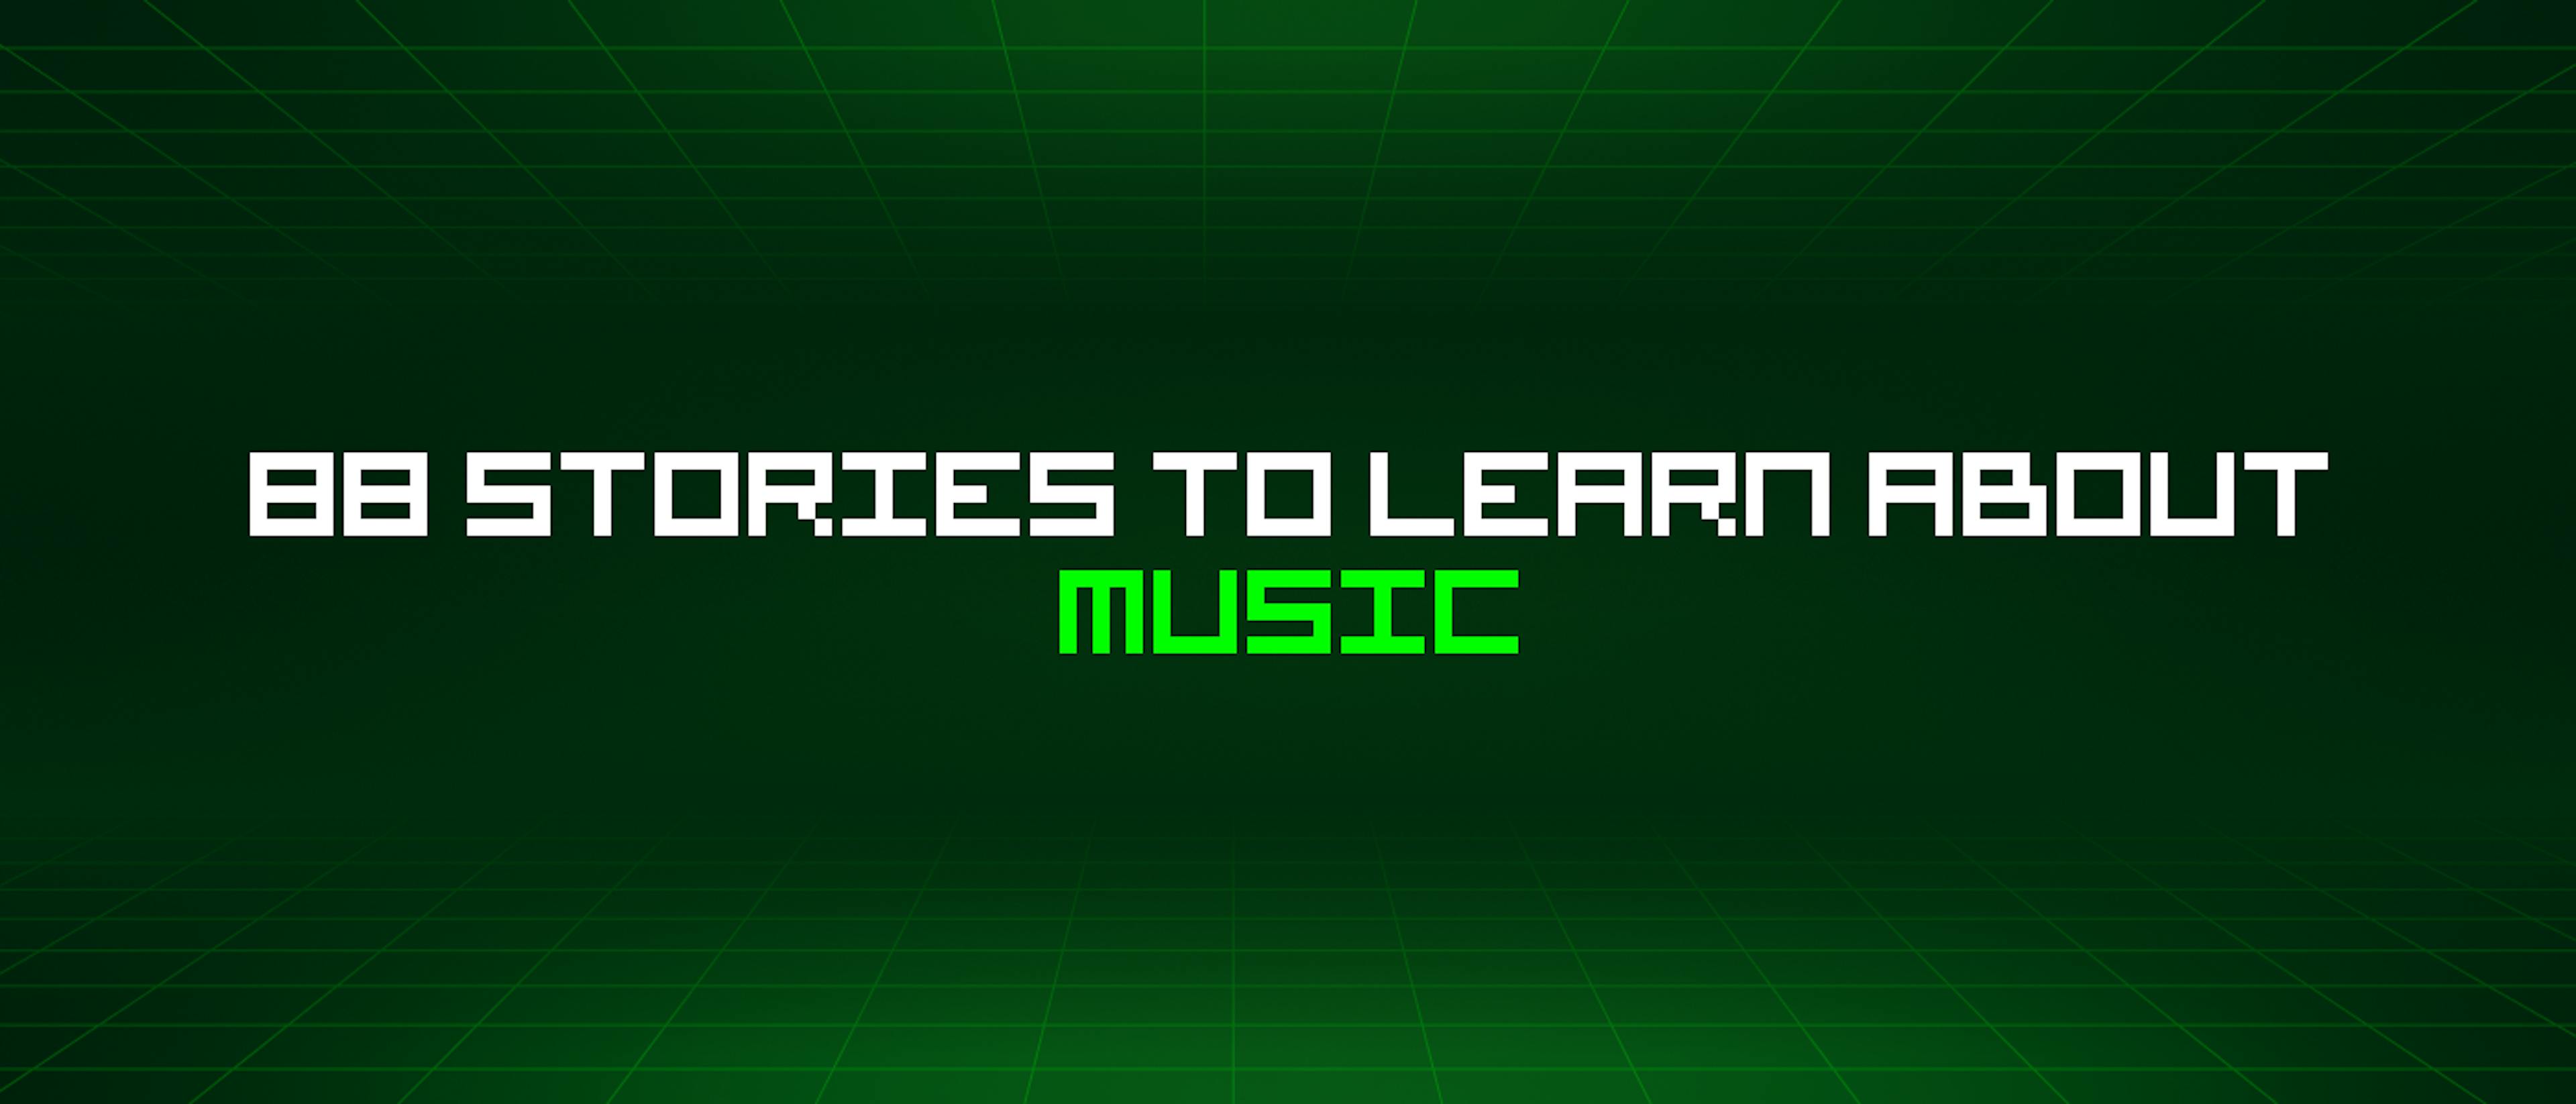 featured image - 88 Stories To Learn About Music